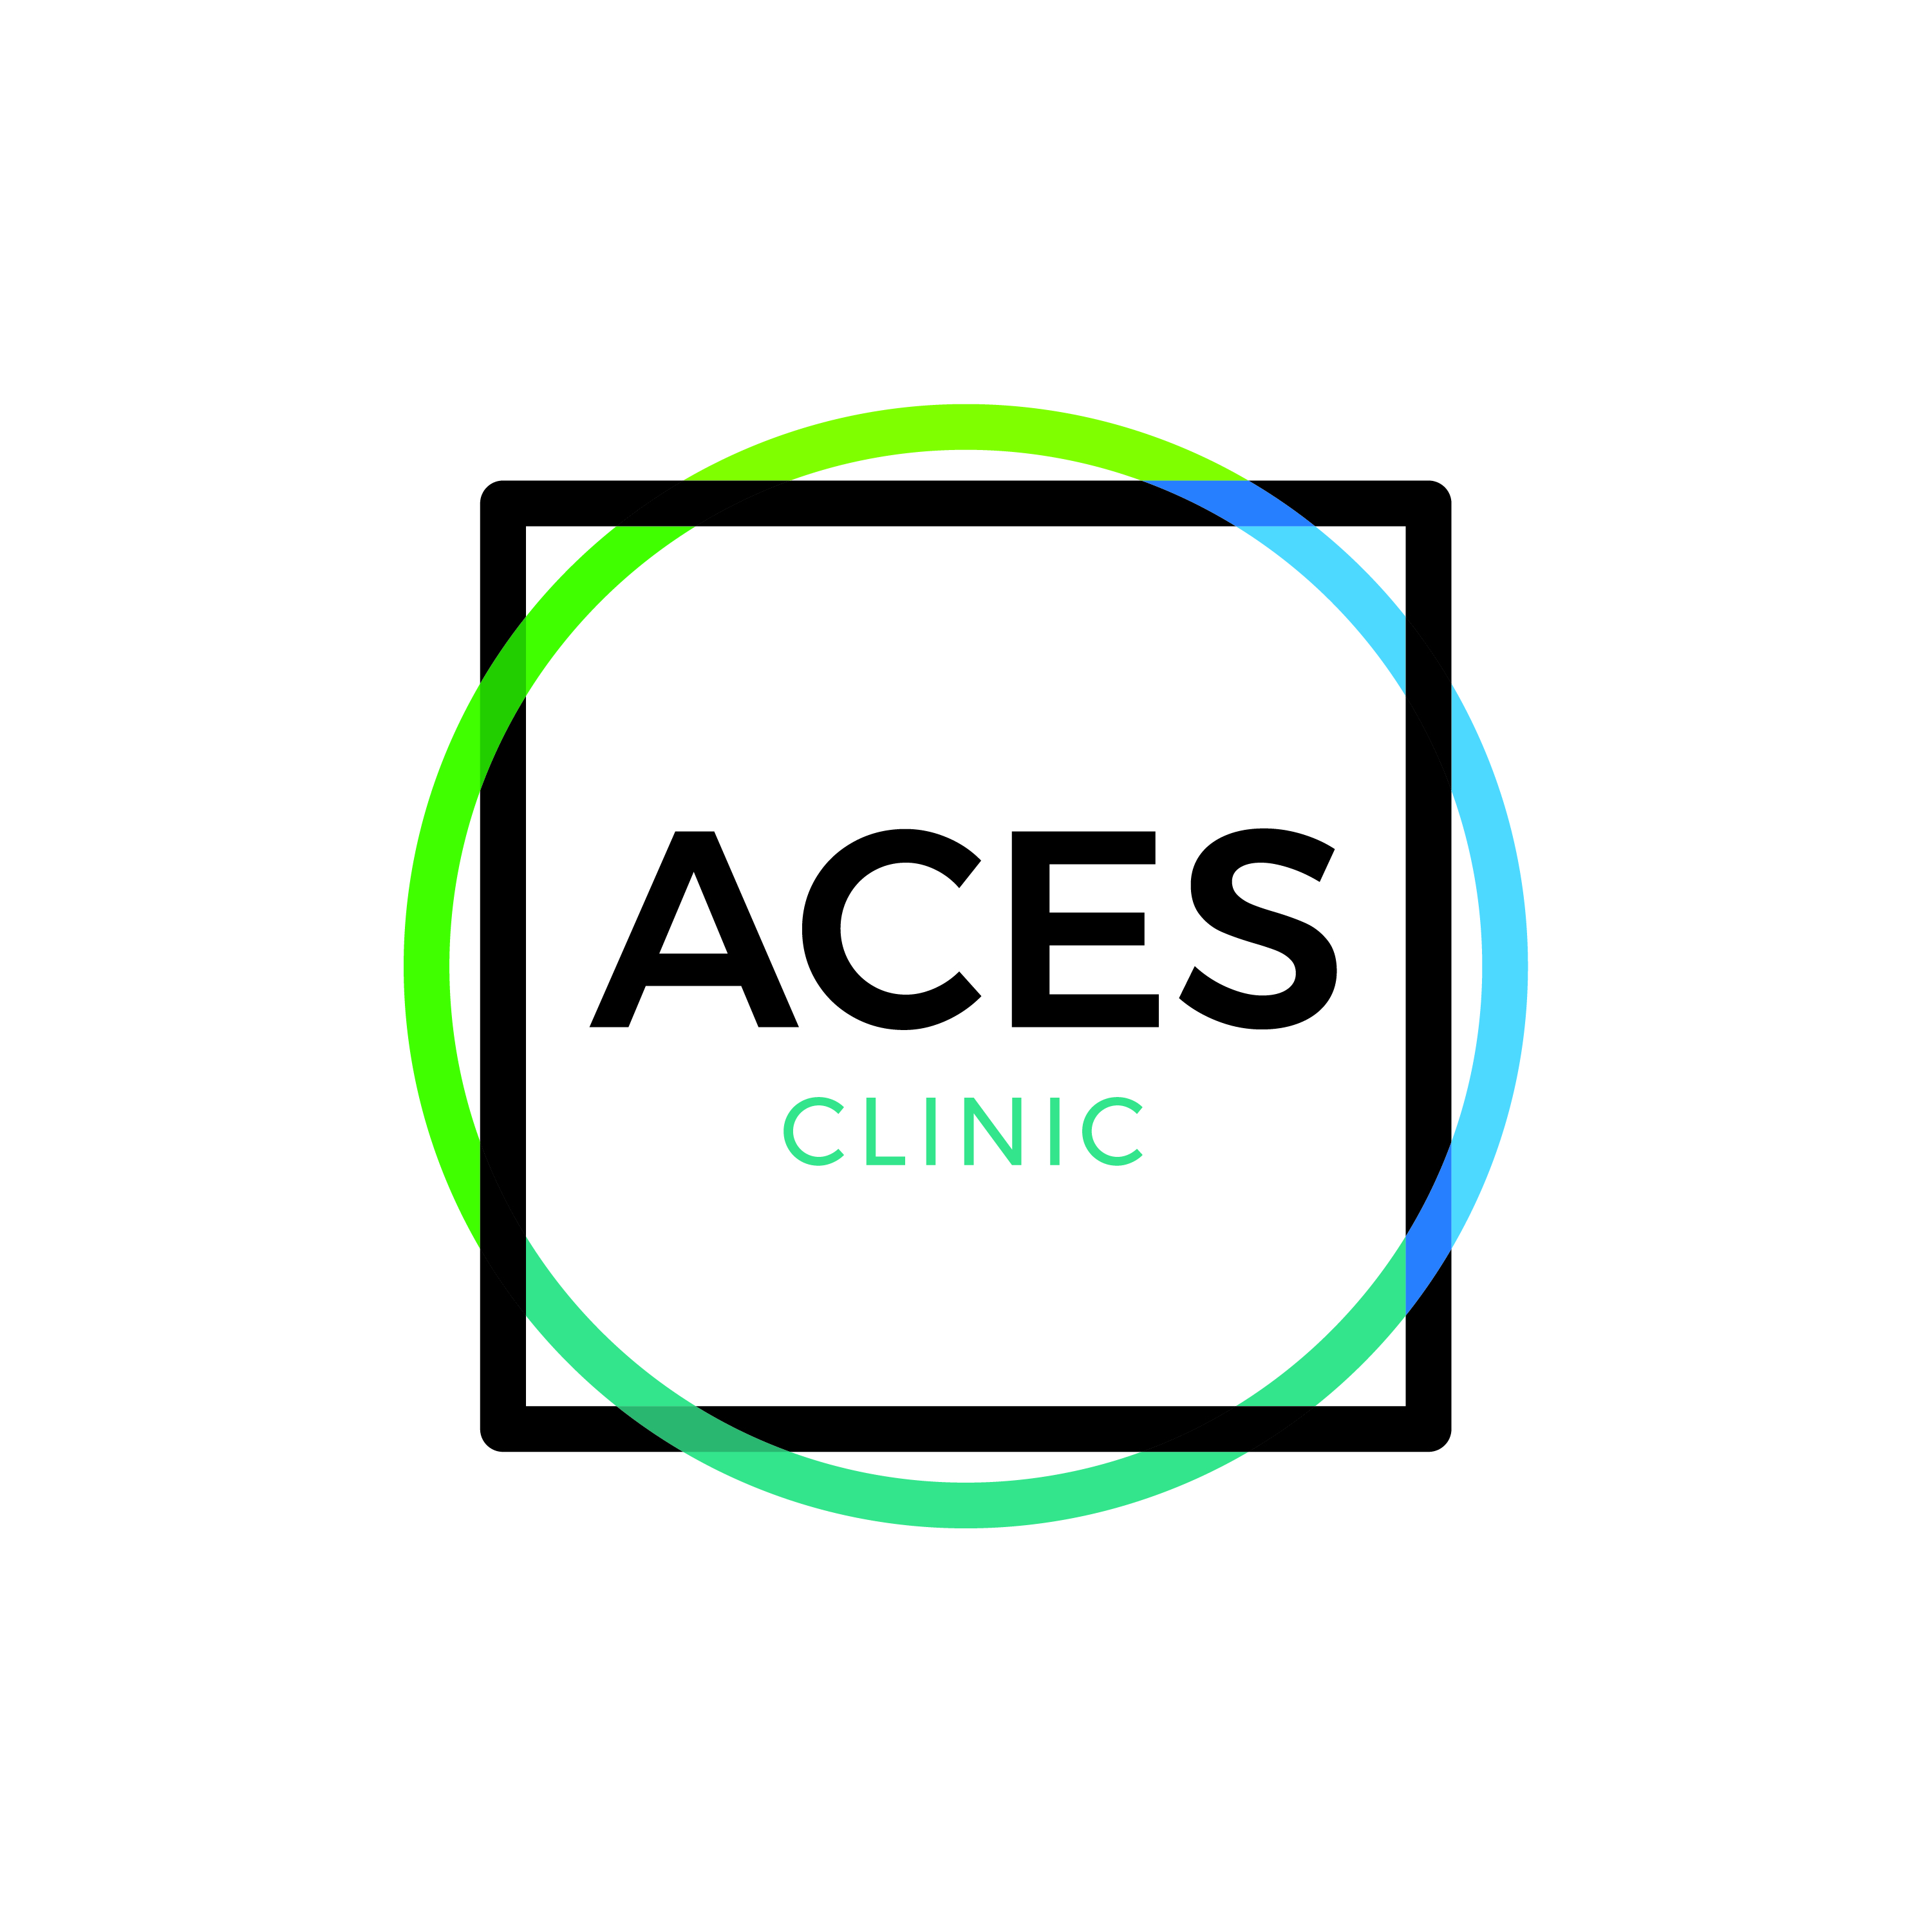 ACES Clinic